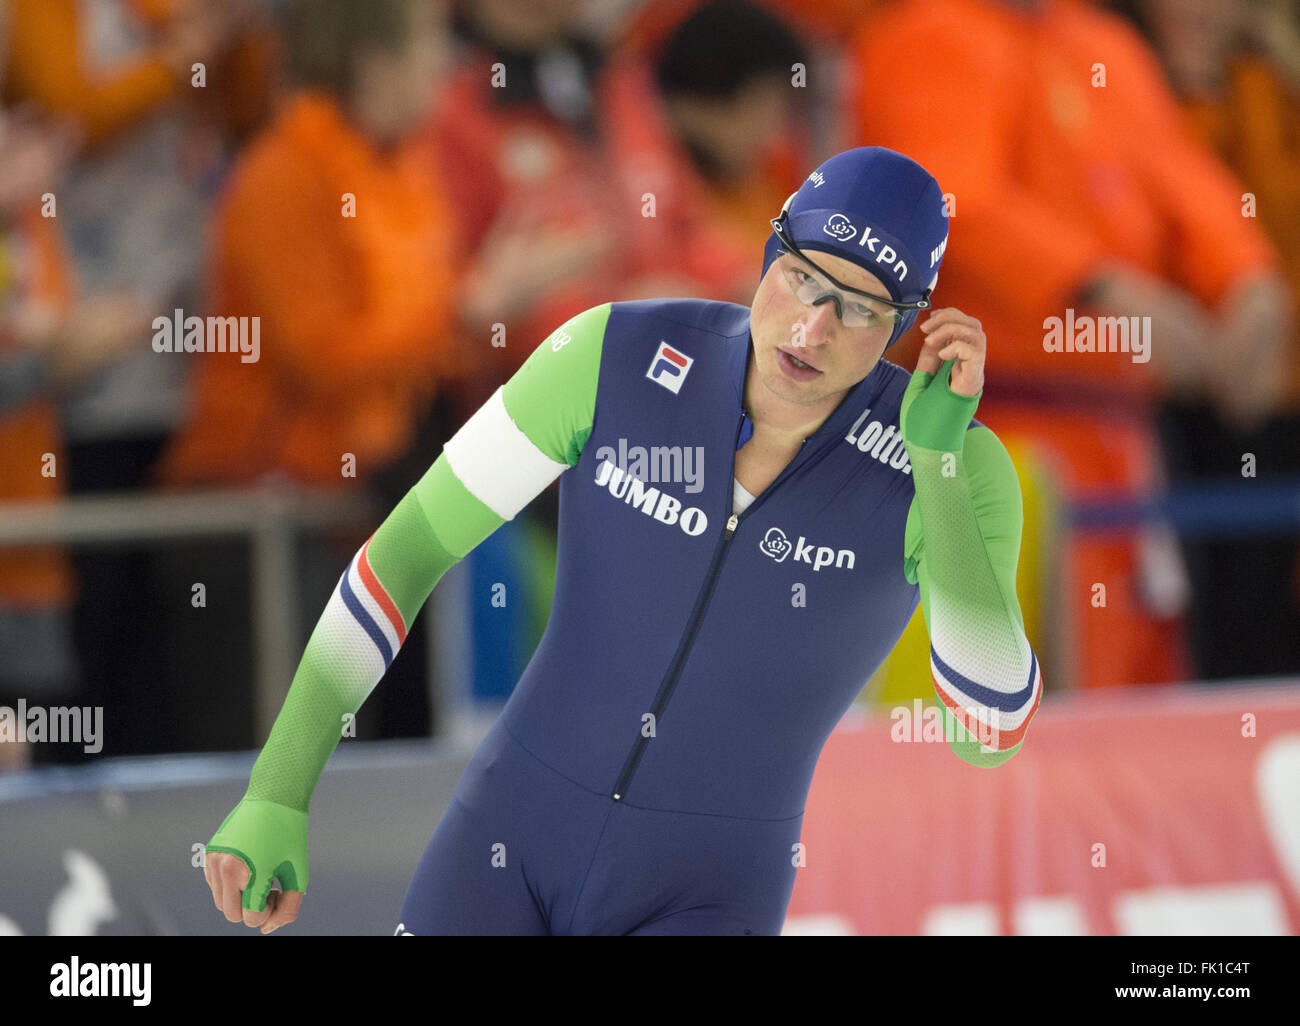 Sven Kramer of the Netherlands reacts during the men's 500 competition at the ISU World Allround Speed Skating Championships in Berlin, Germany, 05 March 2016. Photo: SOEREN STACHE/dpa Stock Photo